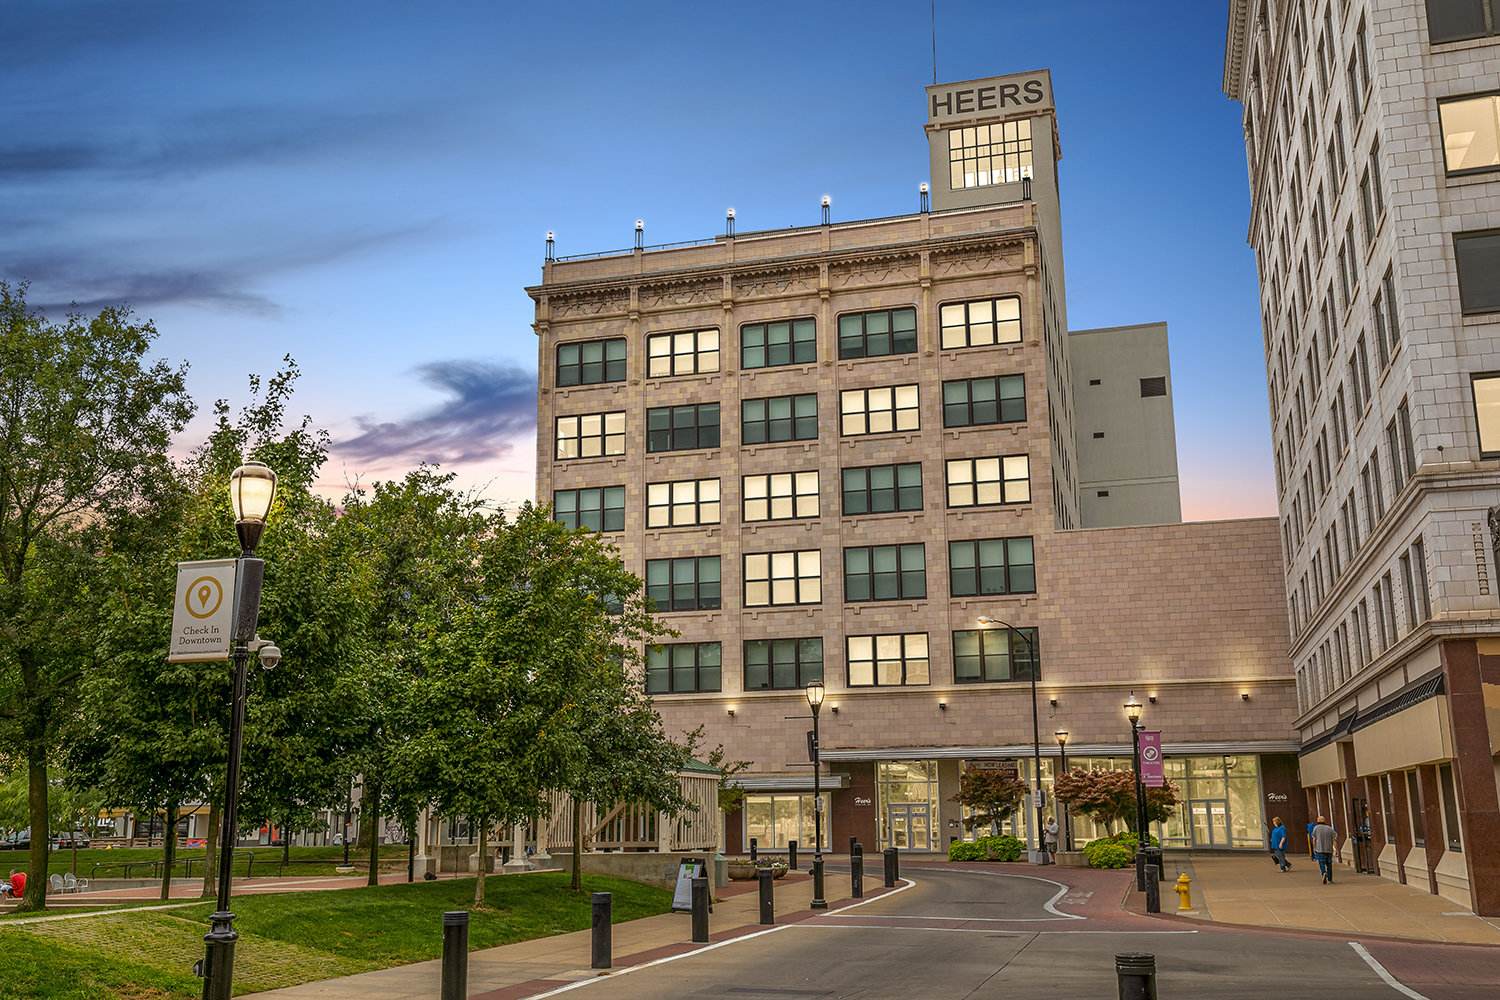 The downtown Heer's building is now owned by Edgewood Real Estate Investment Trust.